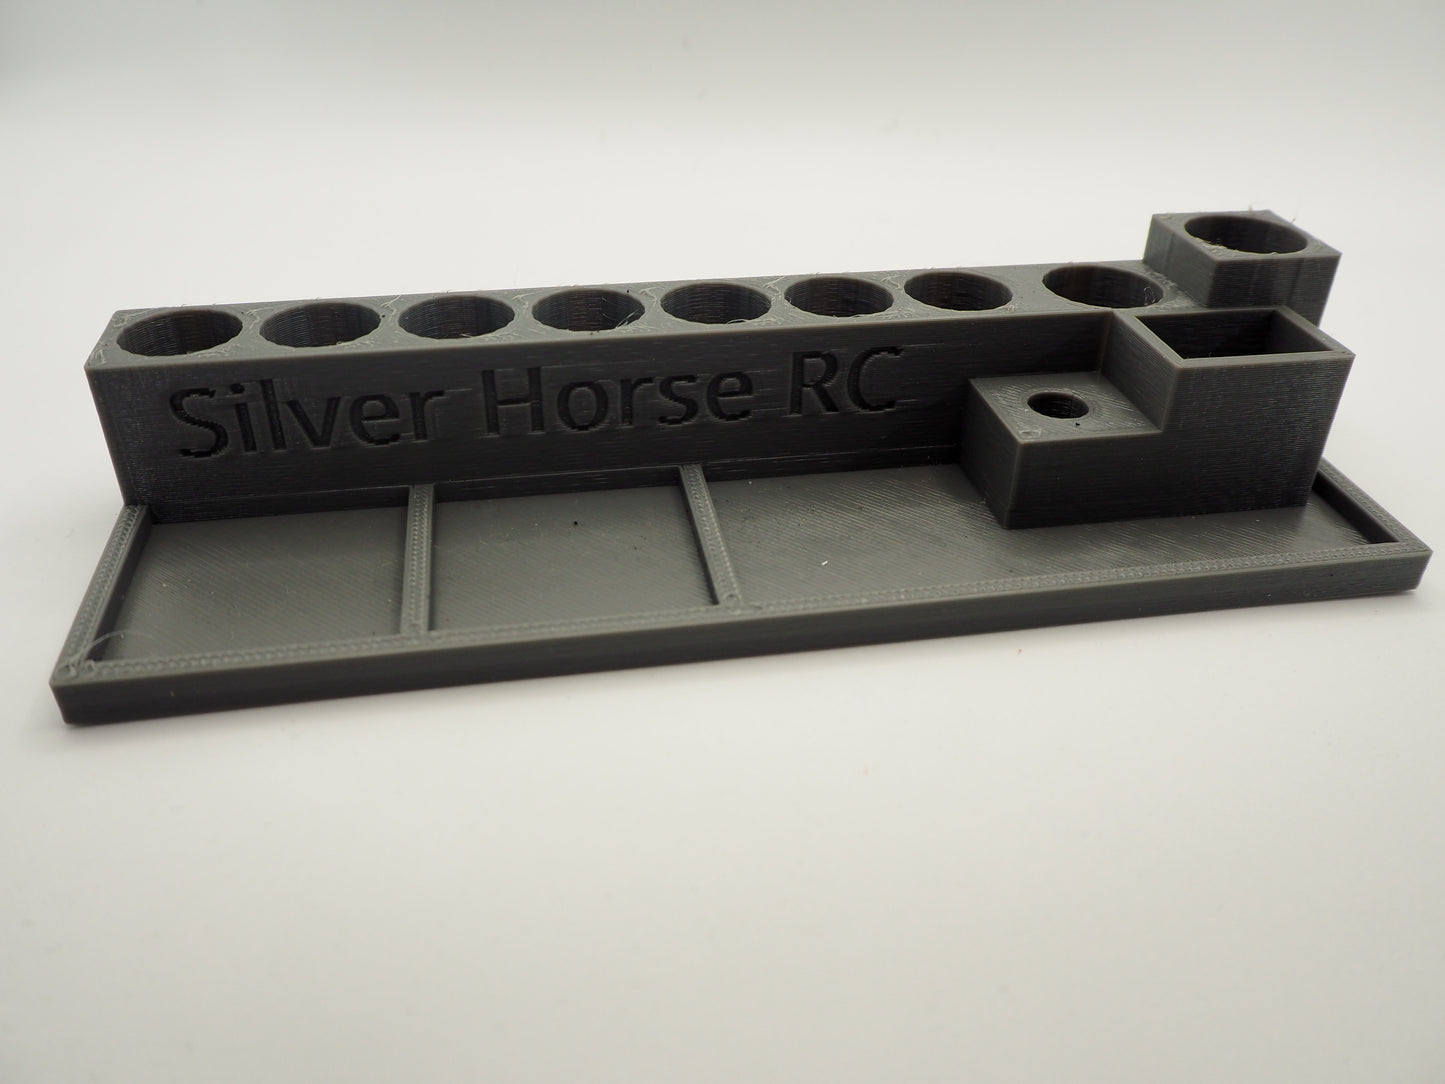 Silver Horse RC Tool Rack